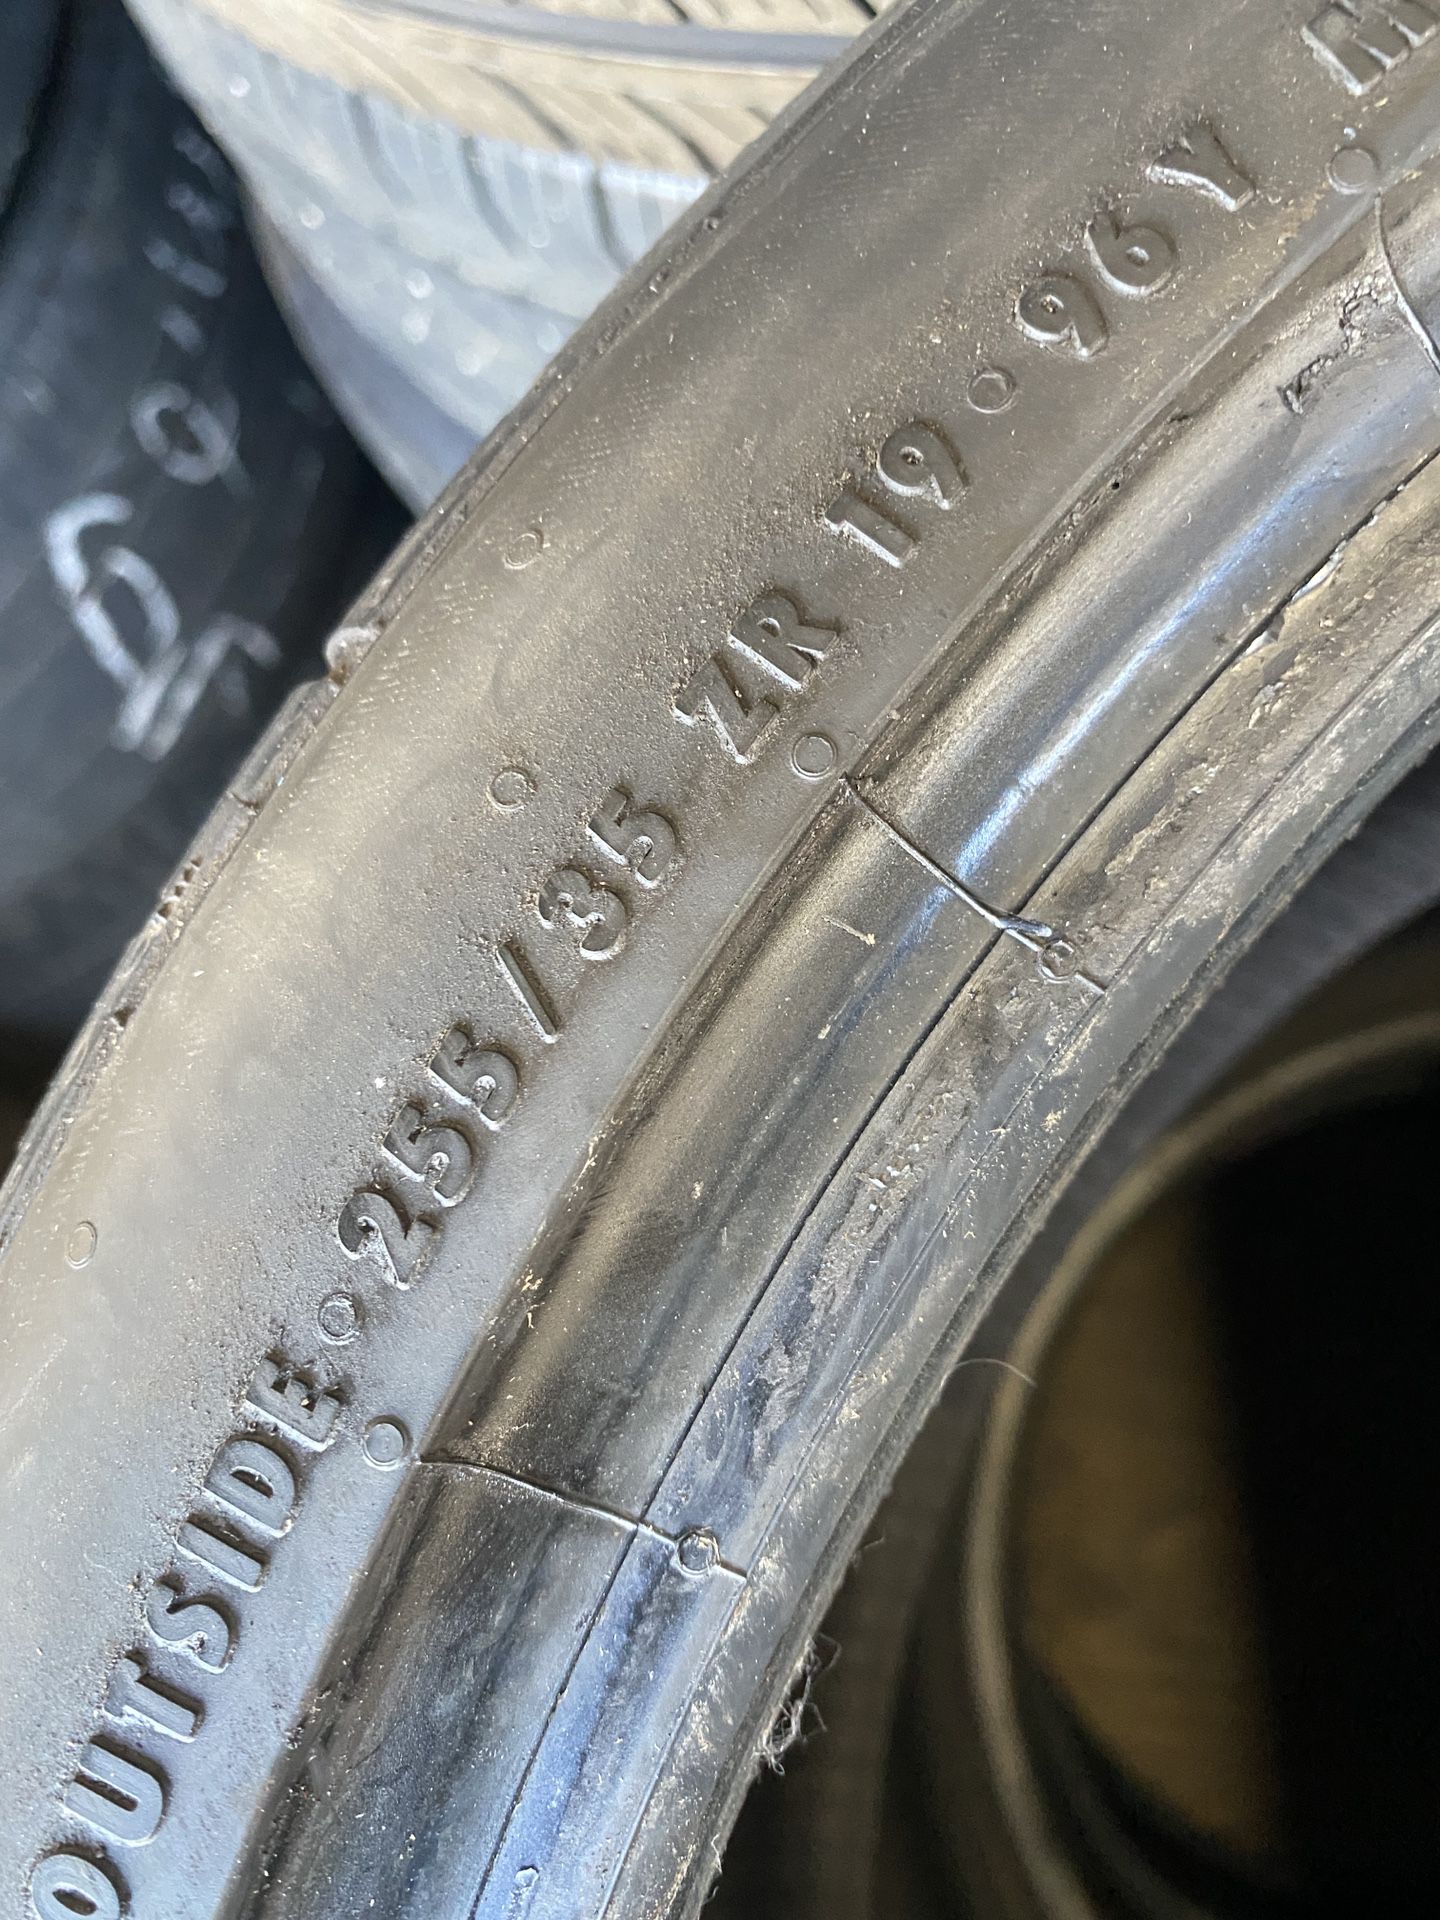 255/35/19 Continental (2 Tires) $125.00/ Both